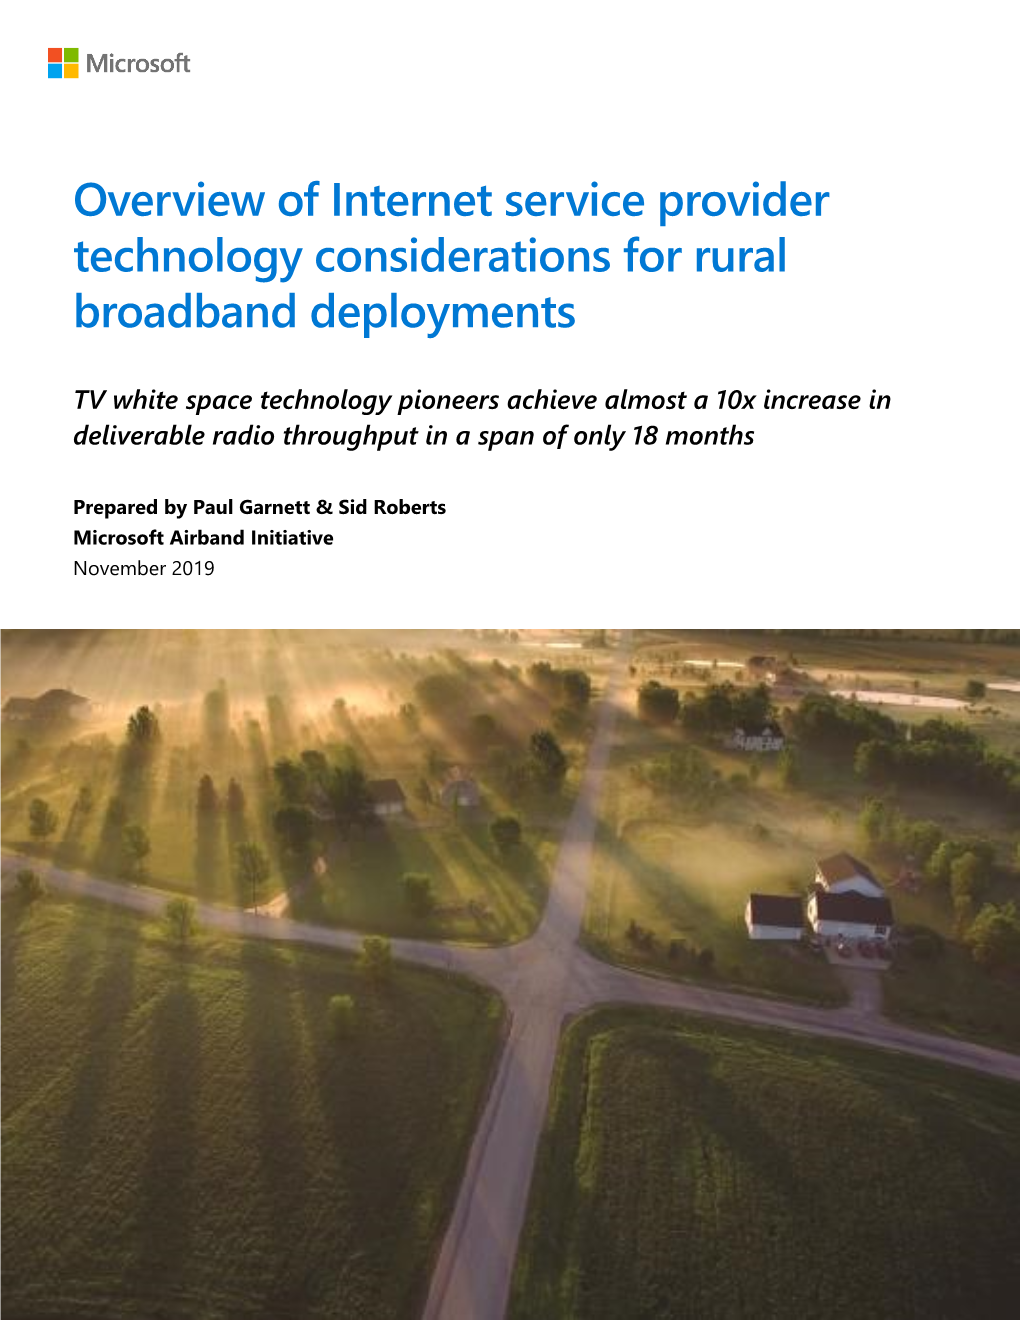 Overview of Internet Service Provider Technology Considerations for Rural Broadband Deployments